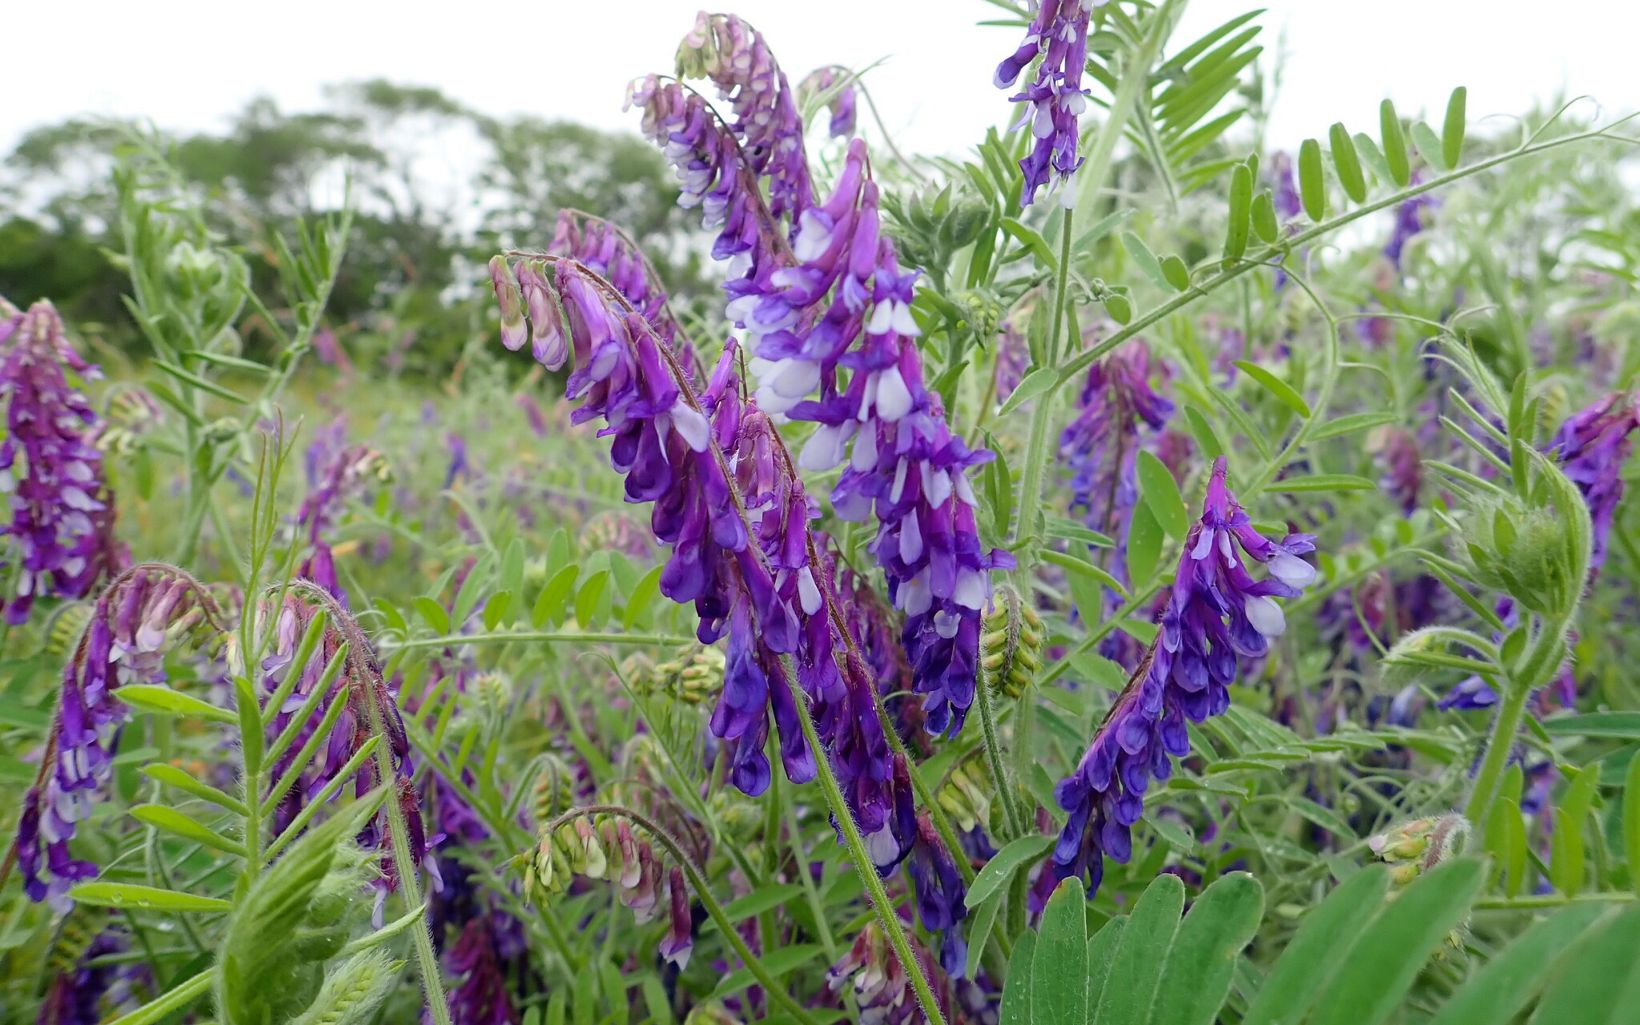 Bright purple flowers that hang down in rows up and down a long stem.